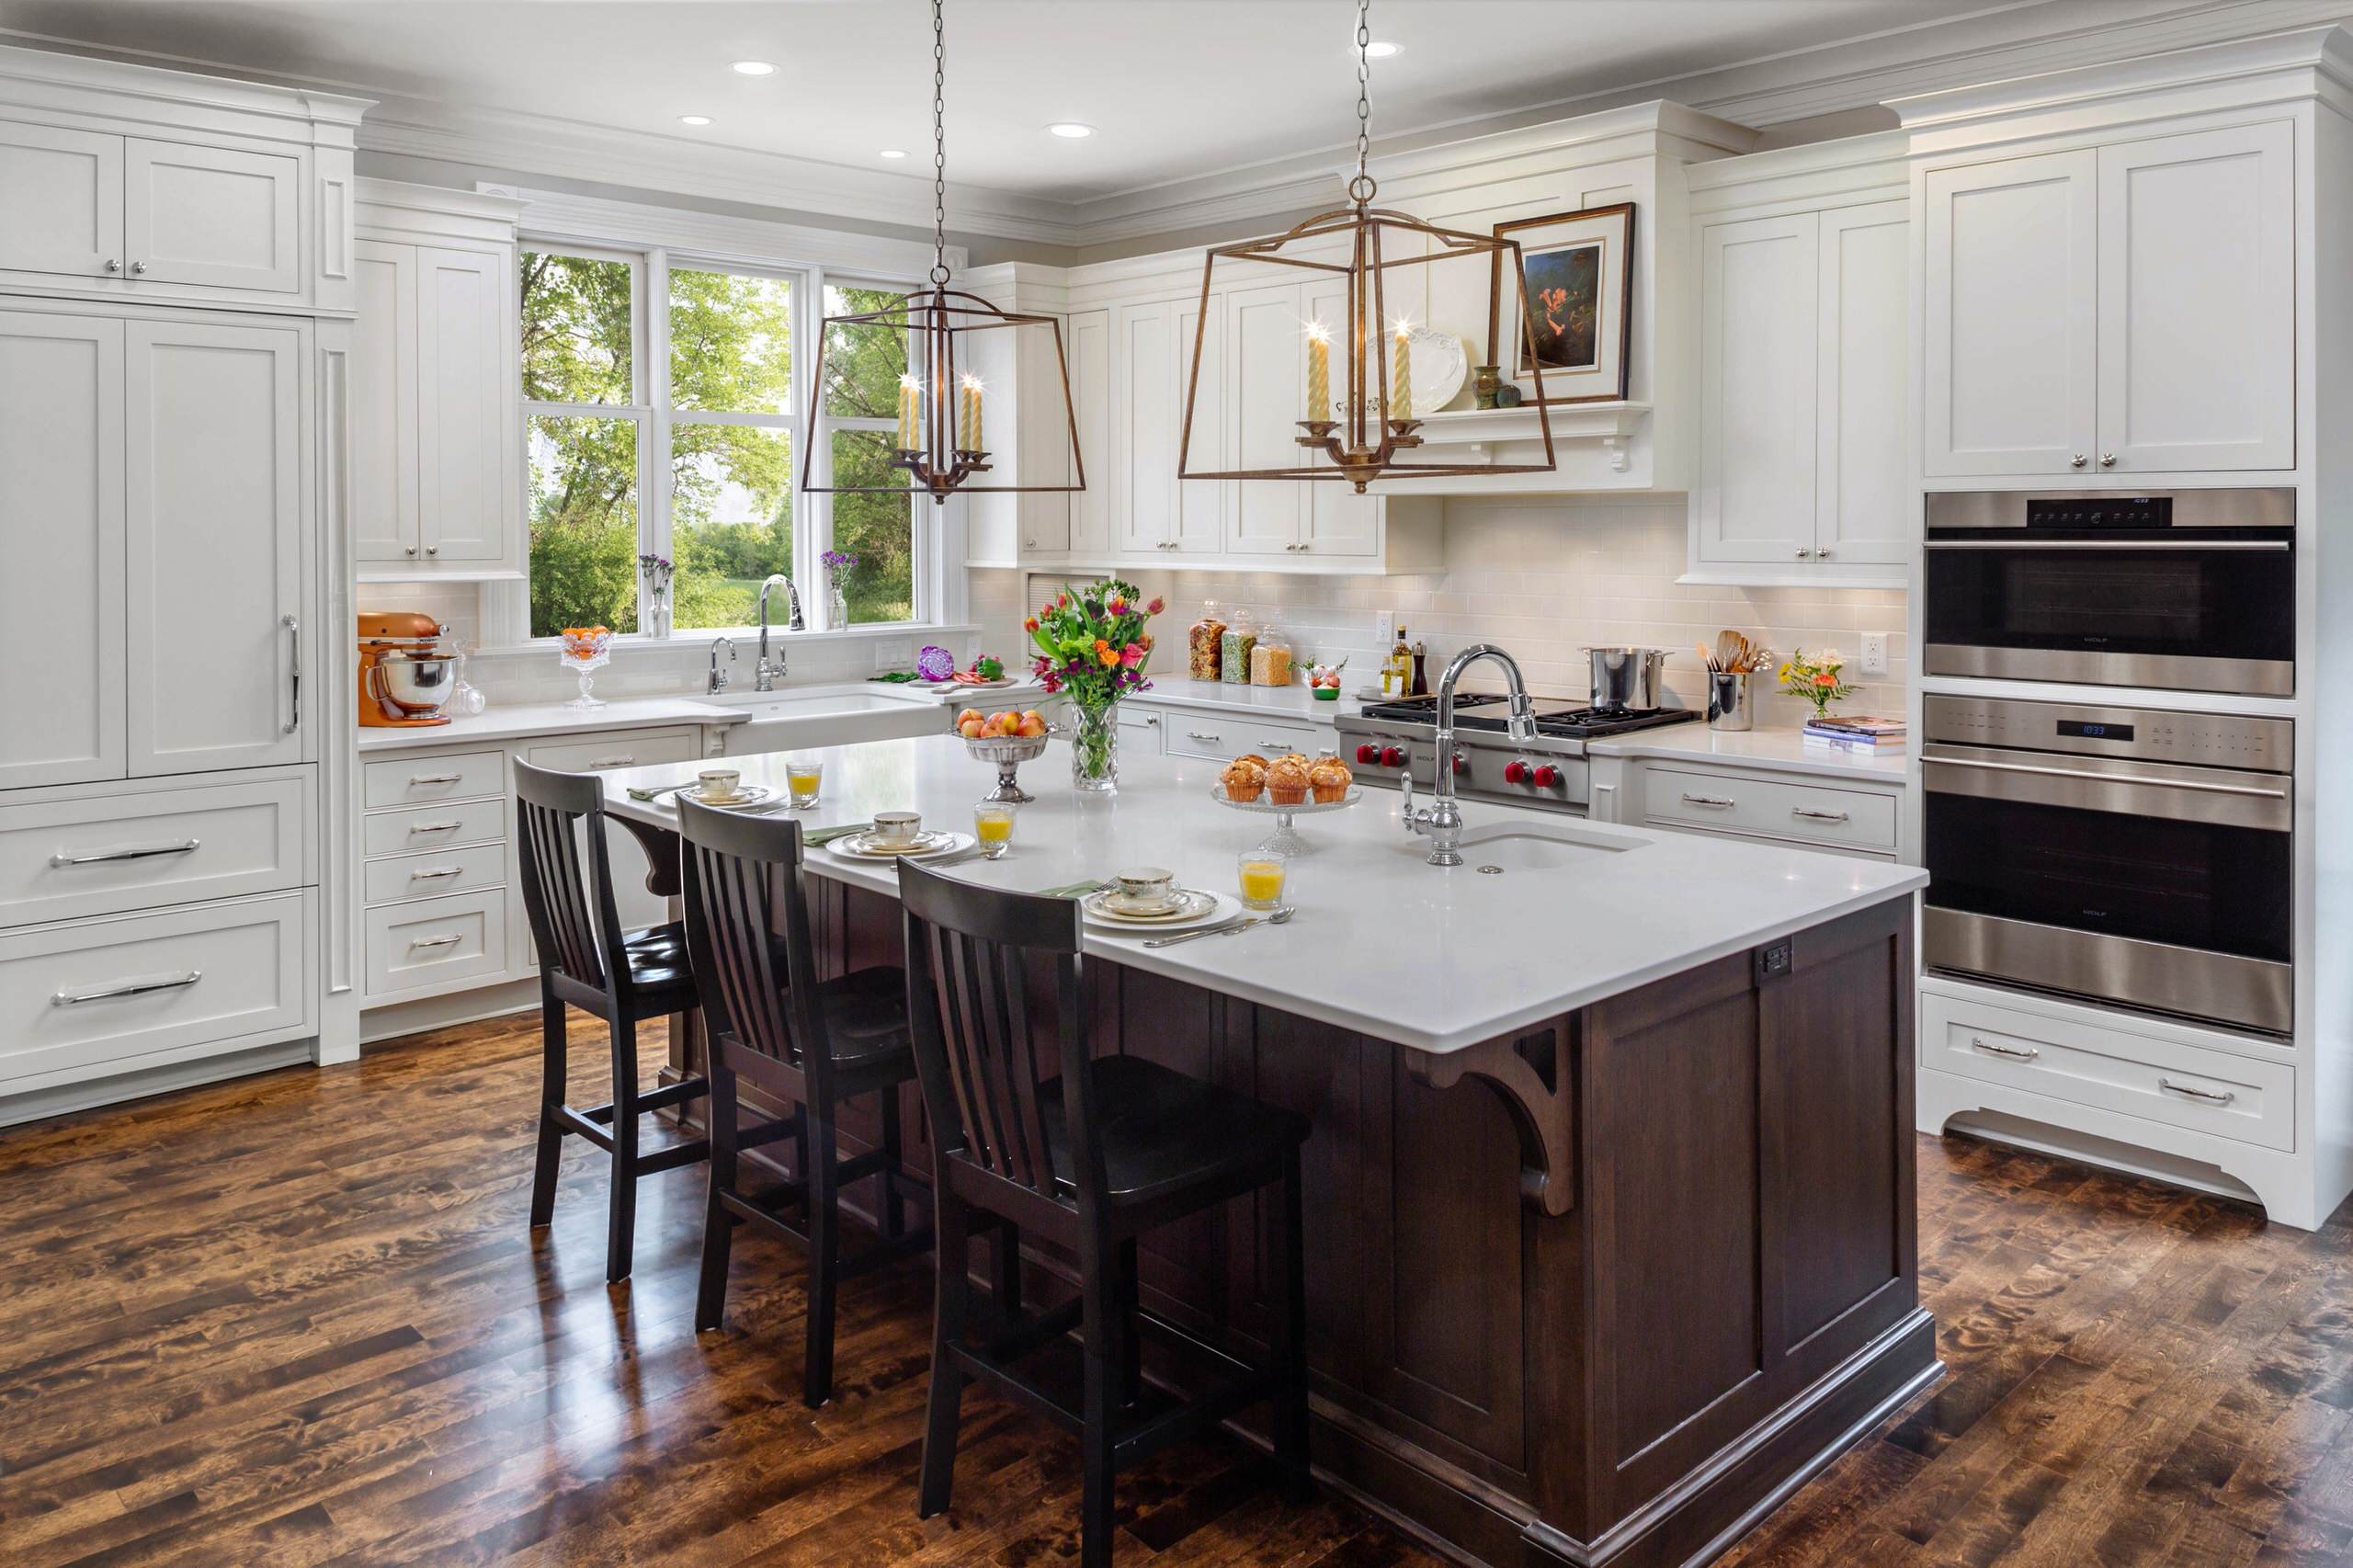 20 Beautiful White Kitchen Cabinets Pictures & Ideas   Houzz